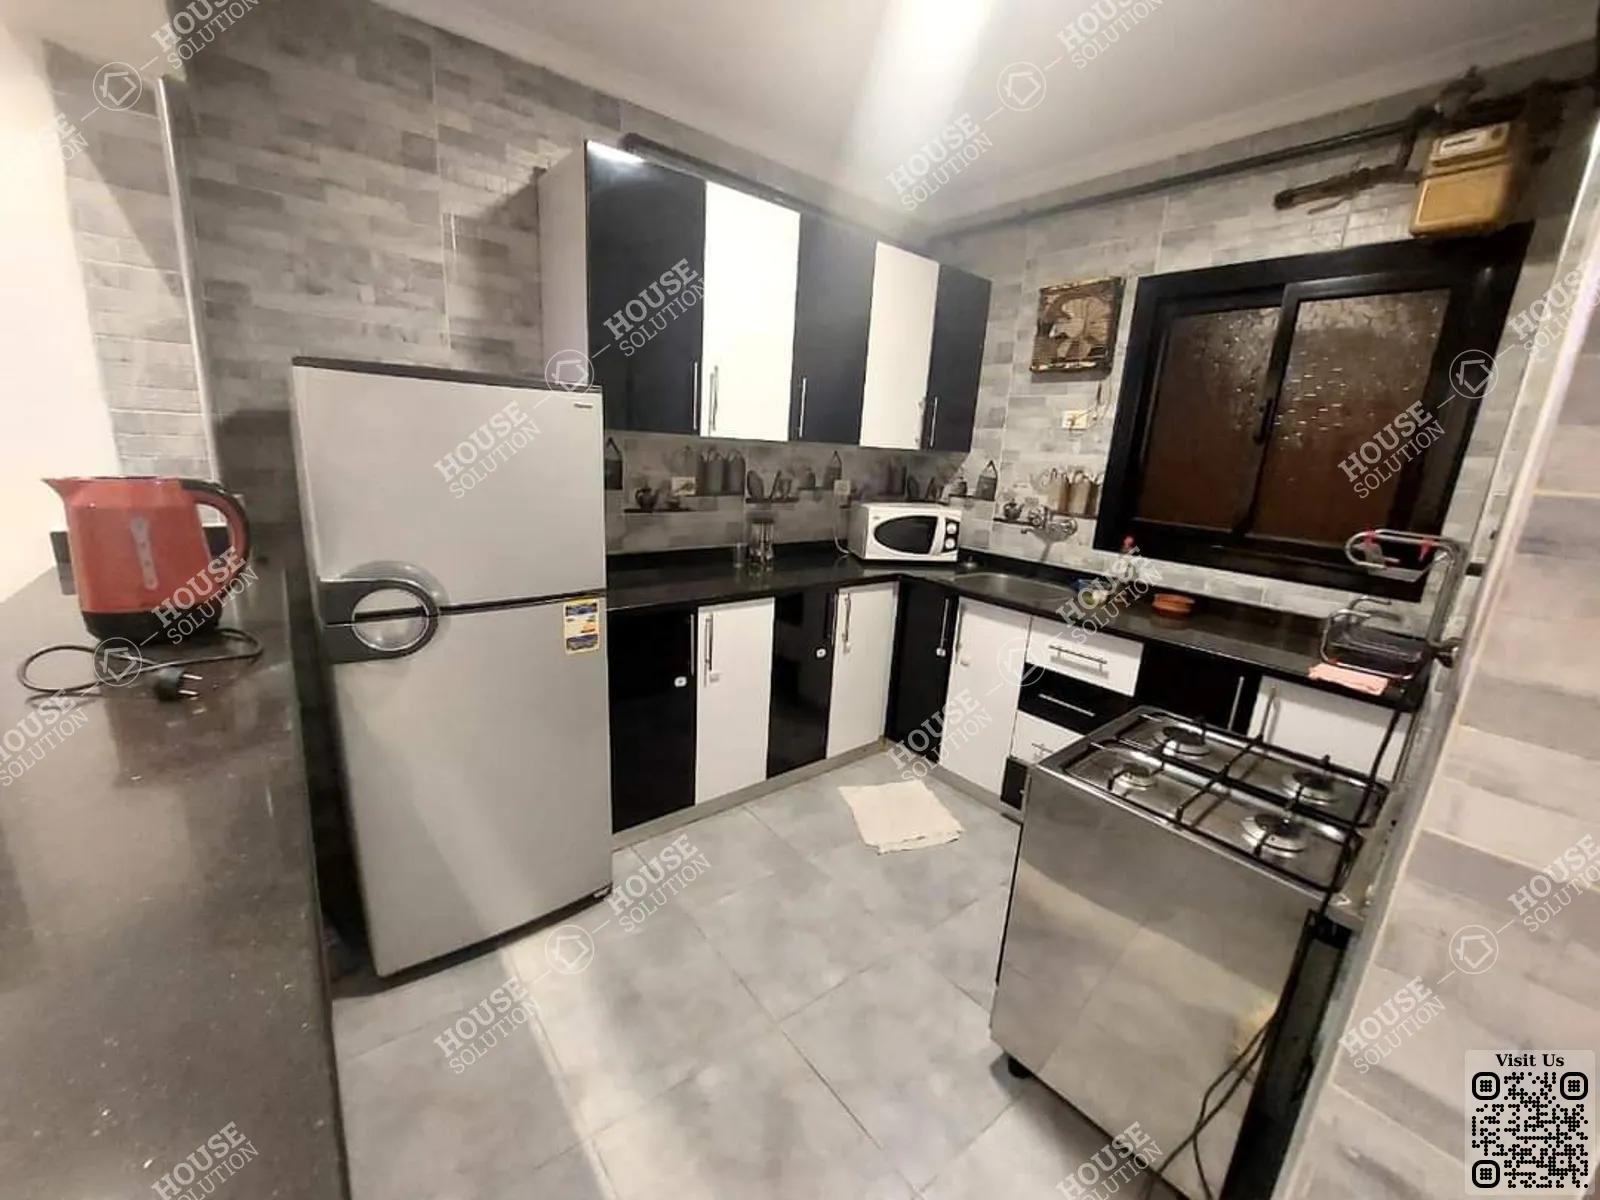 KITCHEN  @ Apartments For Rent In Maadi Maadi Degla Area: 110 m² consists of 2 Bedrooms 1 Bathrooms Modern furnished 5 stars #5710-1